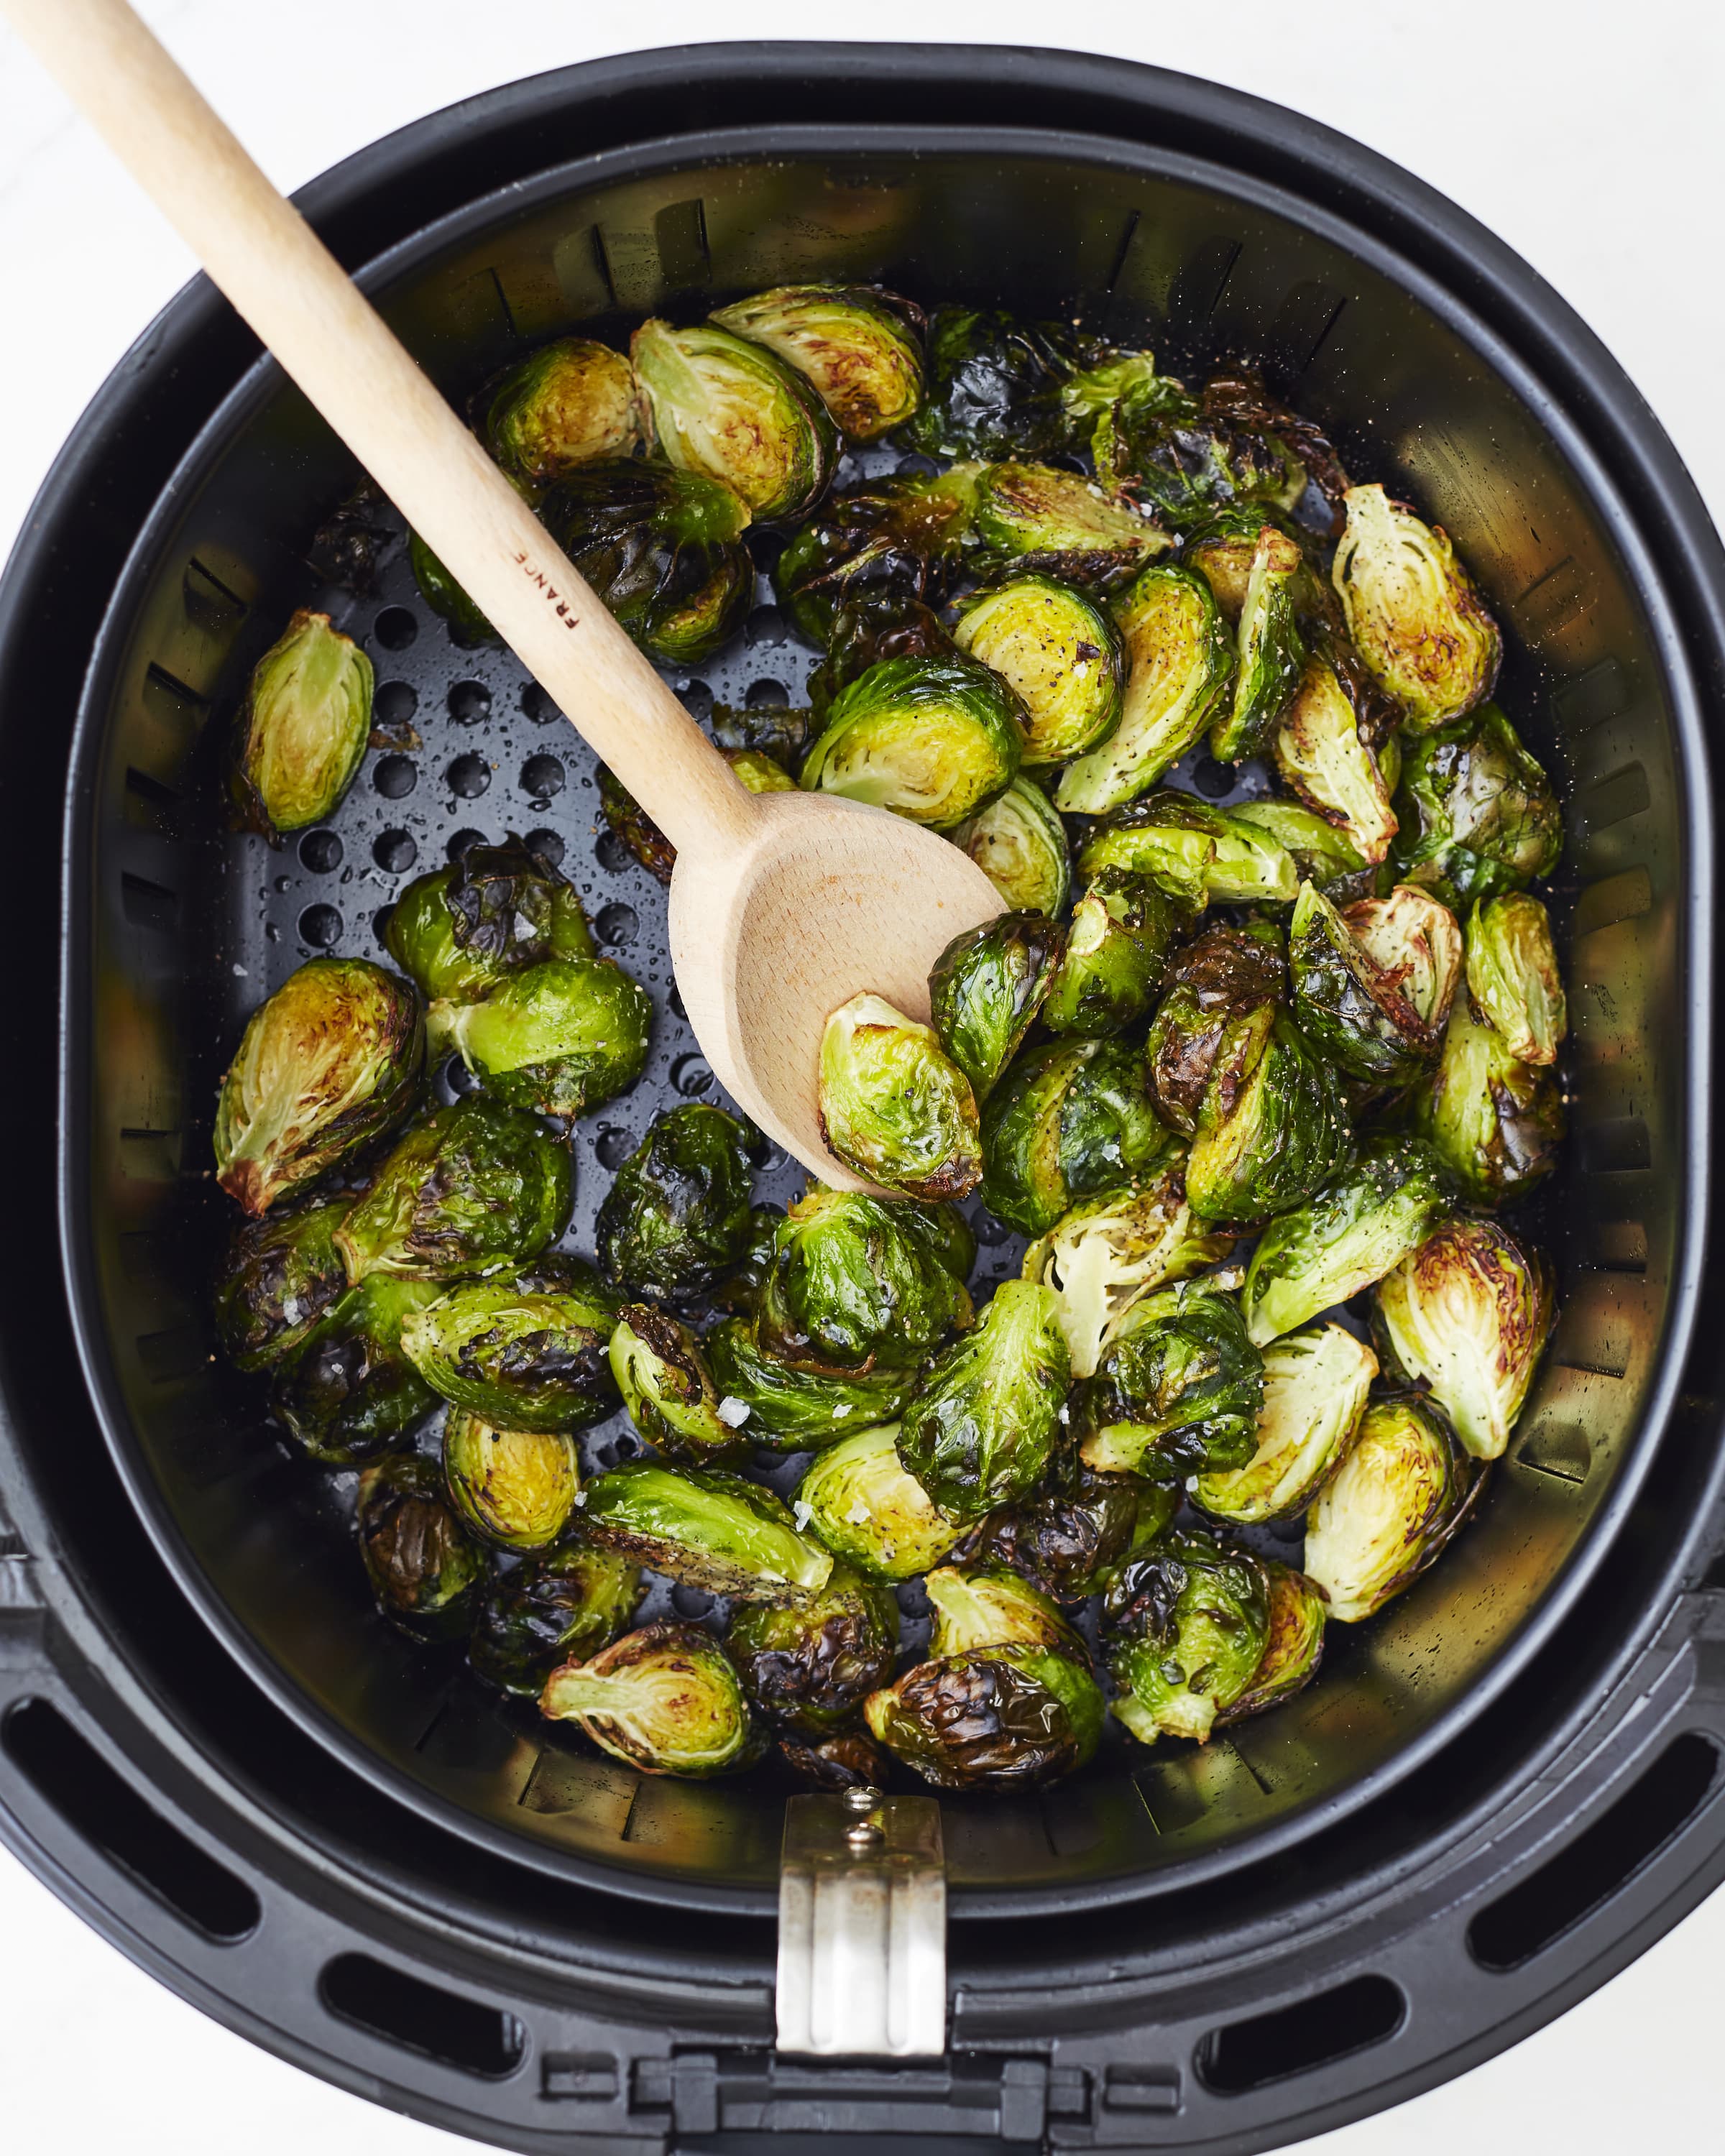 https://cdn.apartmenttherapy.info/image/upload/v1582834799/k/Photo/Recipes/2020-03-Air-Fryer-Brussels-Sprouts/2020_everydayfood_airfryer_brusselssprouts1_090.jpg